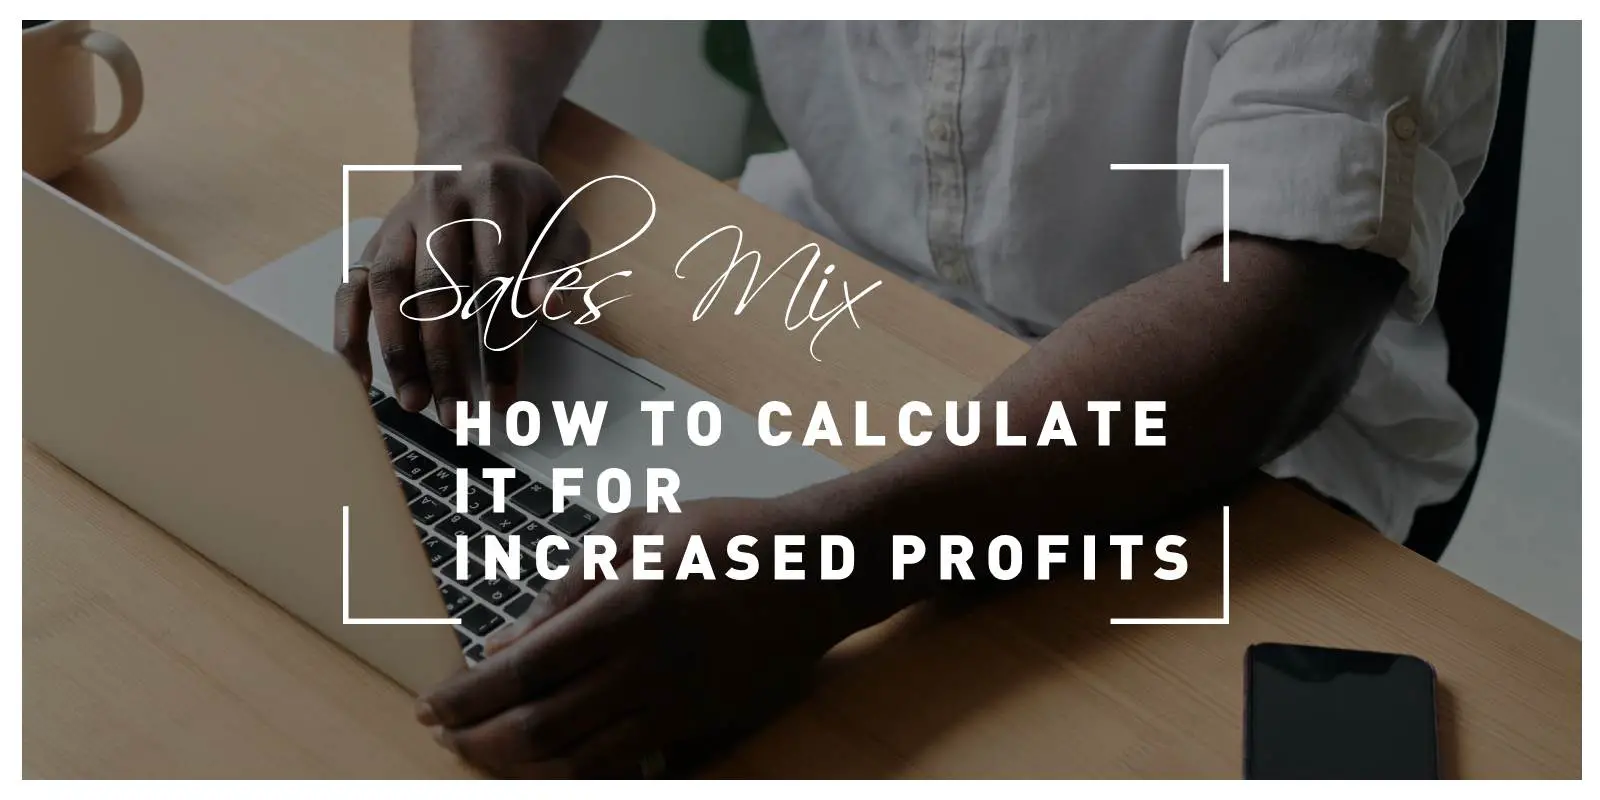 Sales Mix: How to Calculate It For Increased Profits